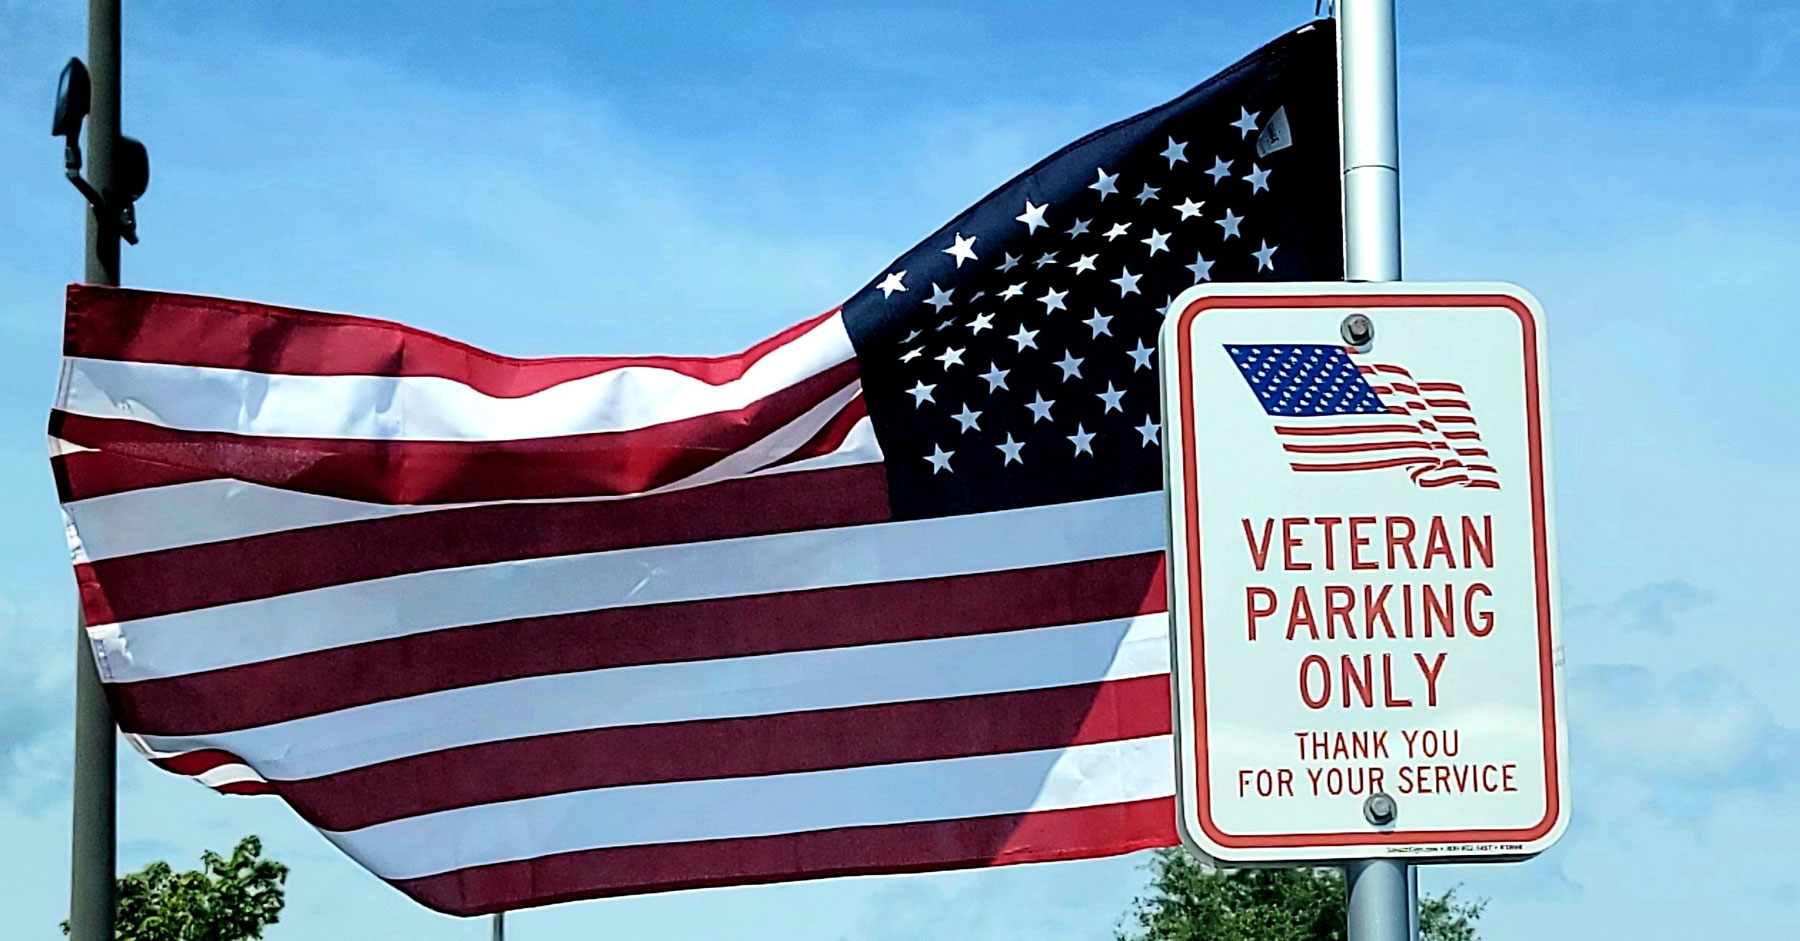 Veteran parking sign and american flag